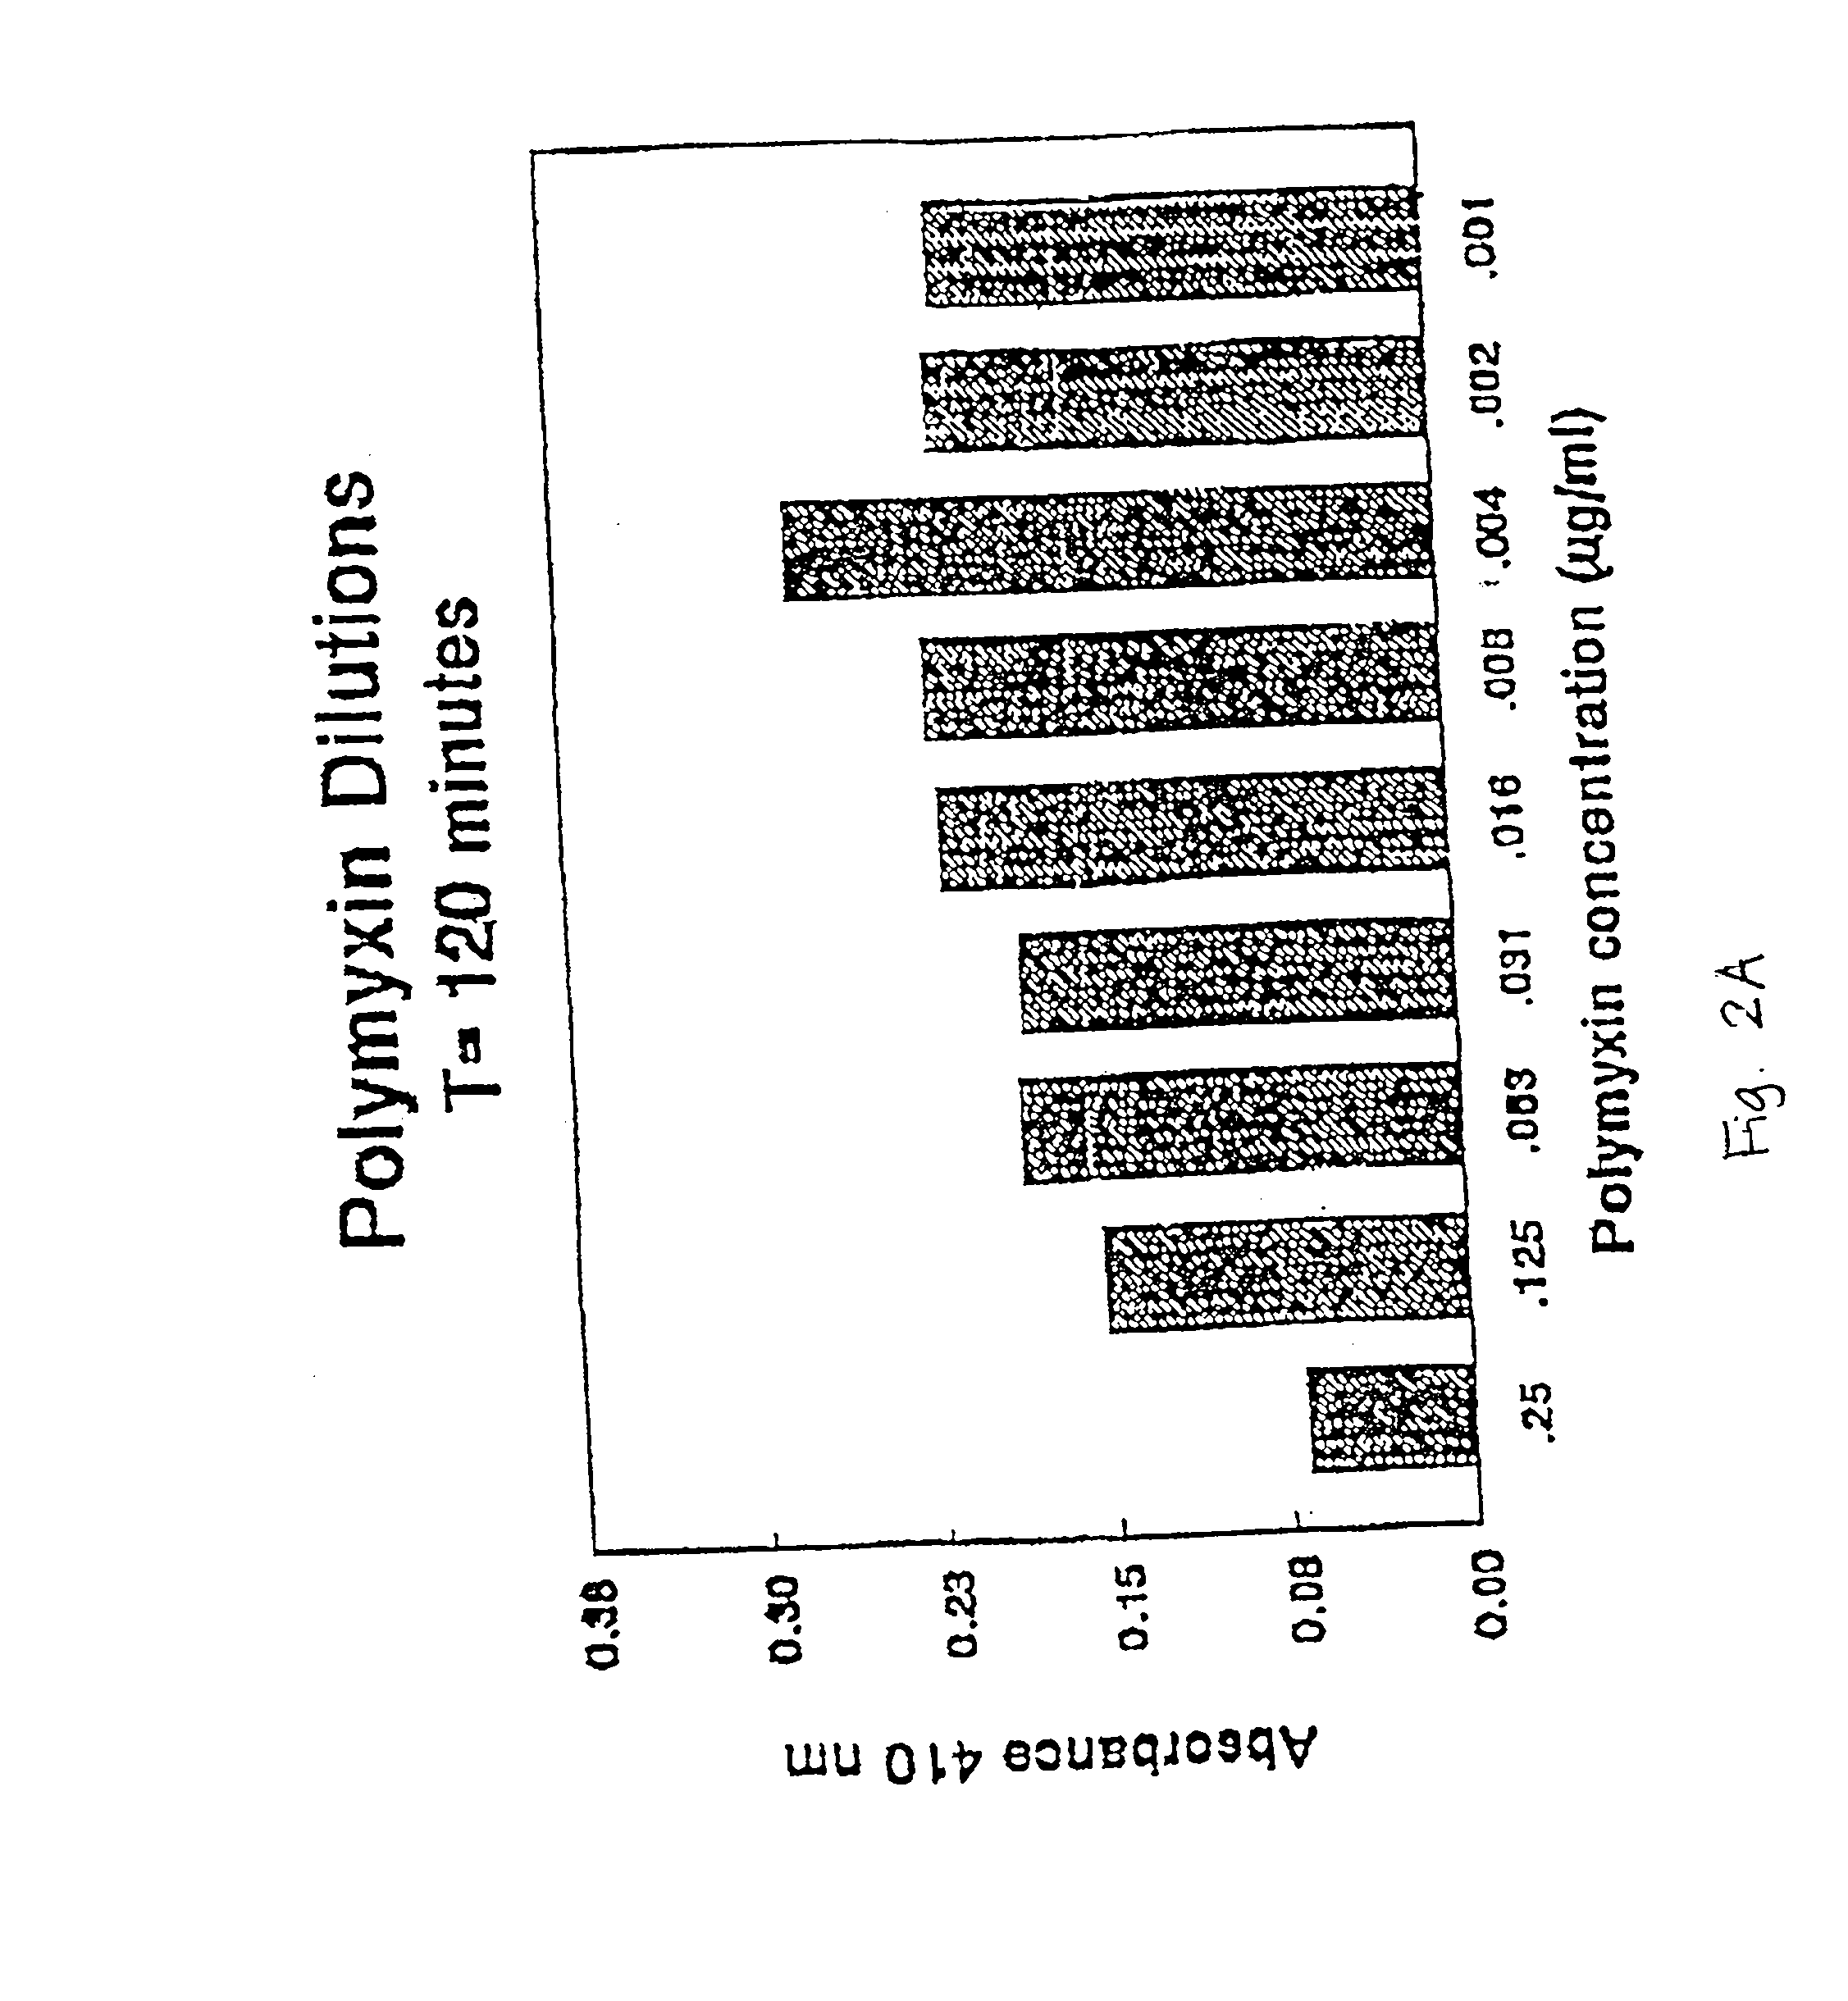 Composition comprising endotoxin neutralizing protein and derivatives and uses thereof